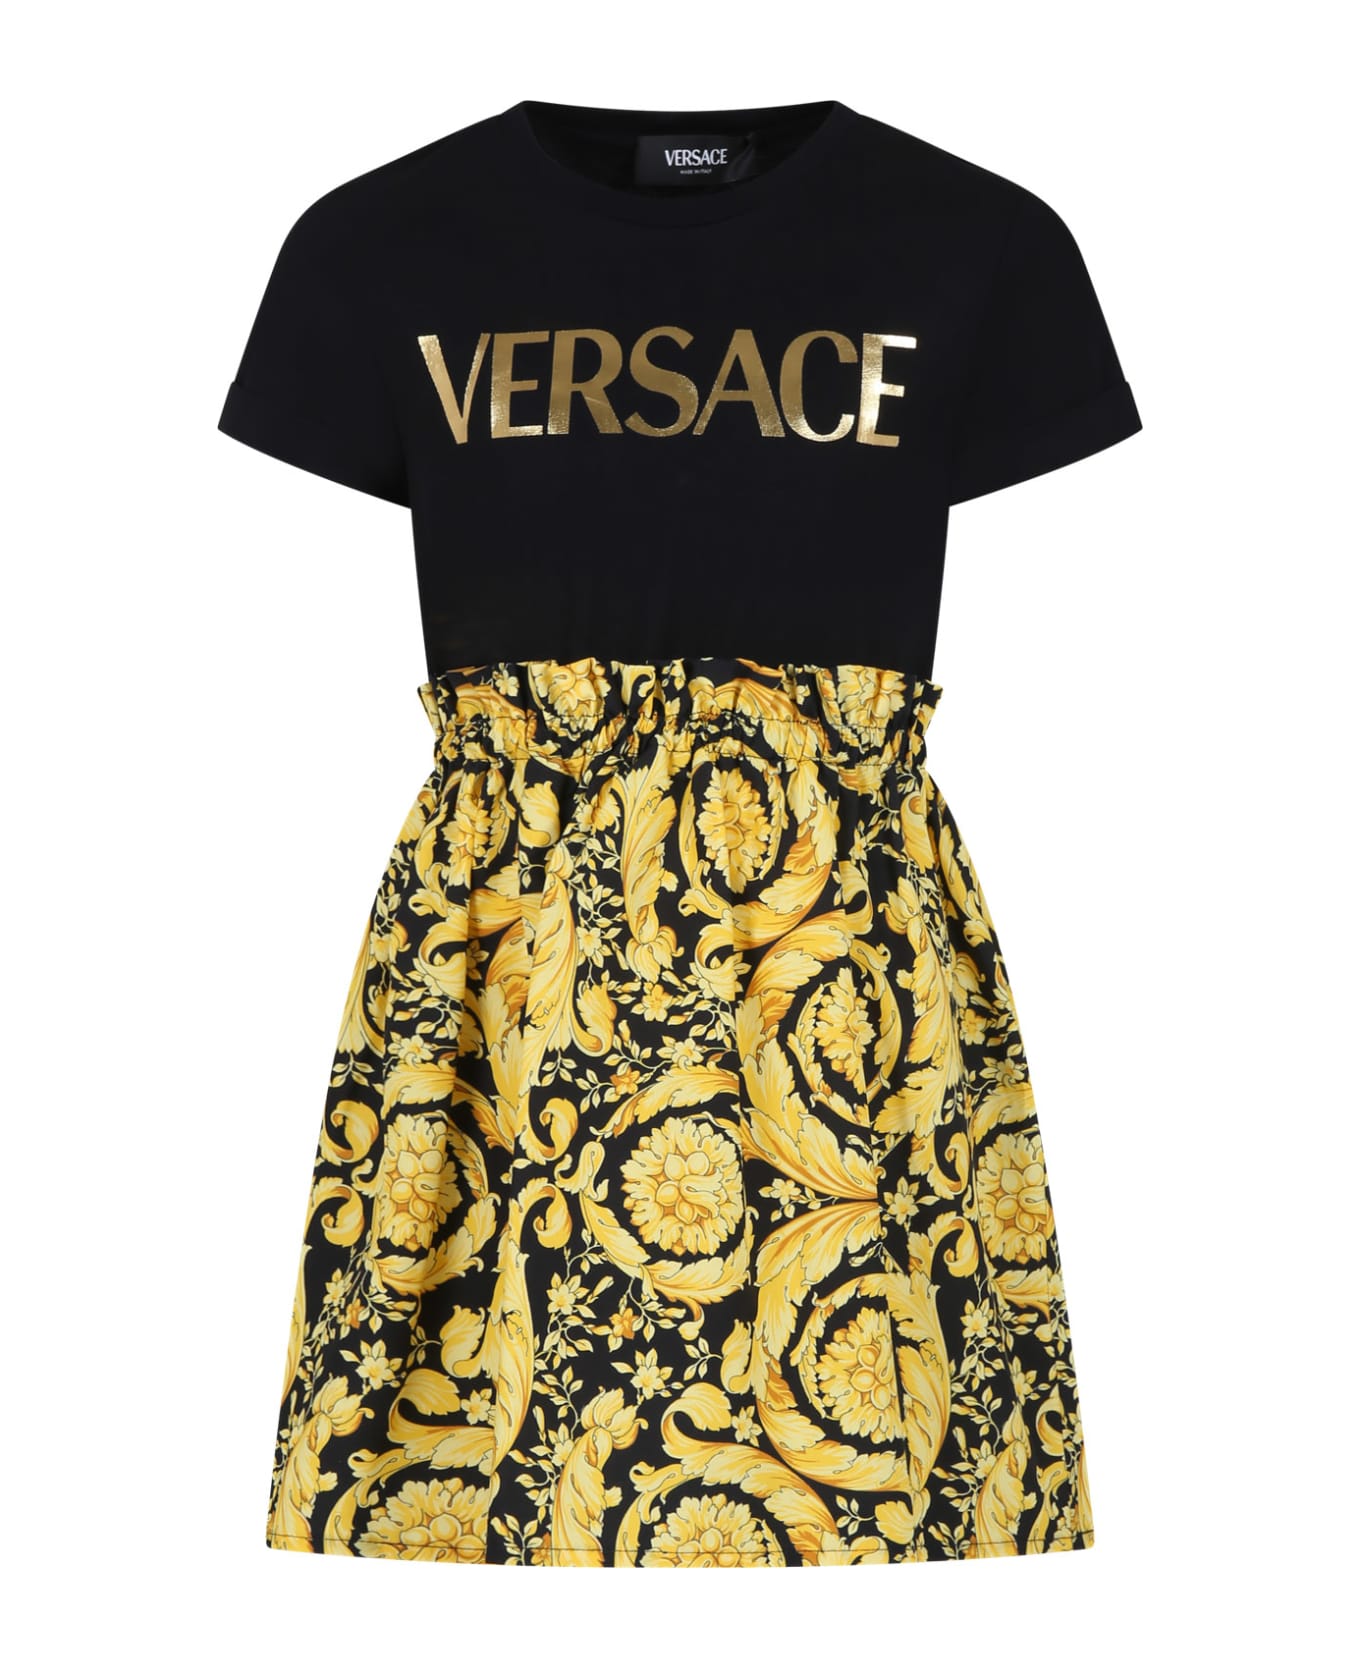 Versace Black Dress For Girl With Versace Logo And Baroque Print - Black